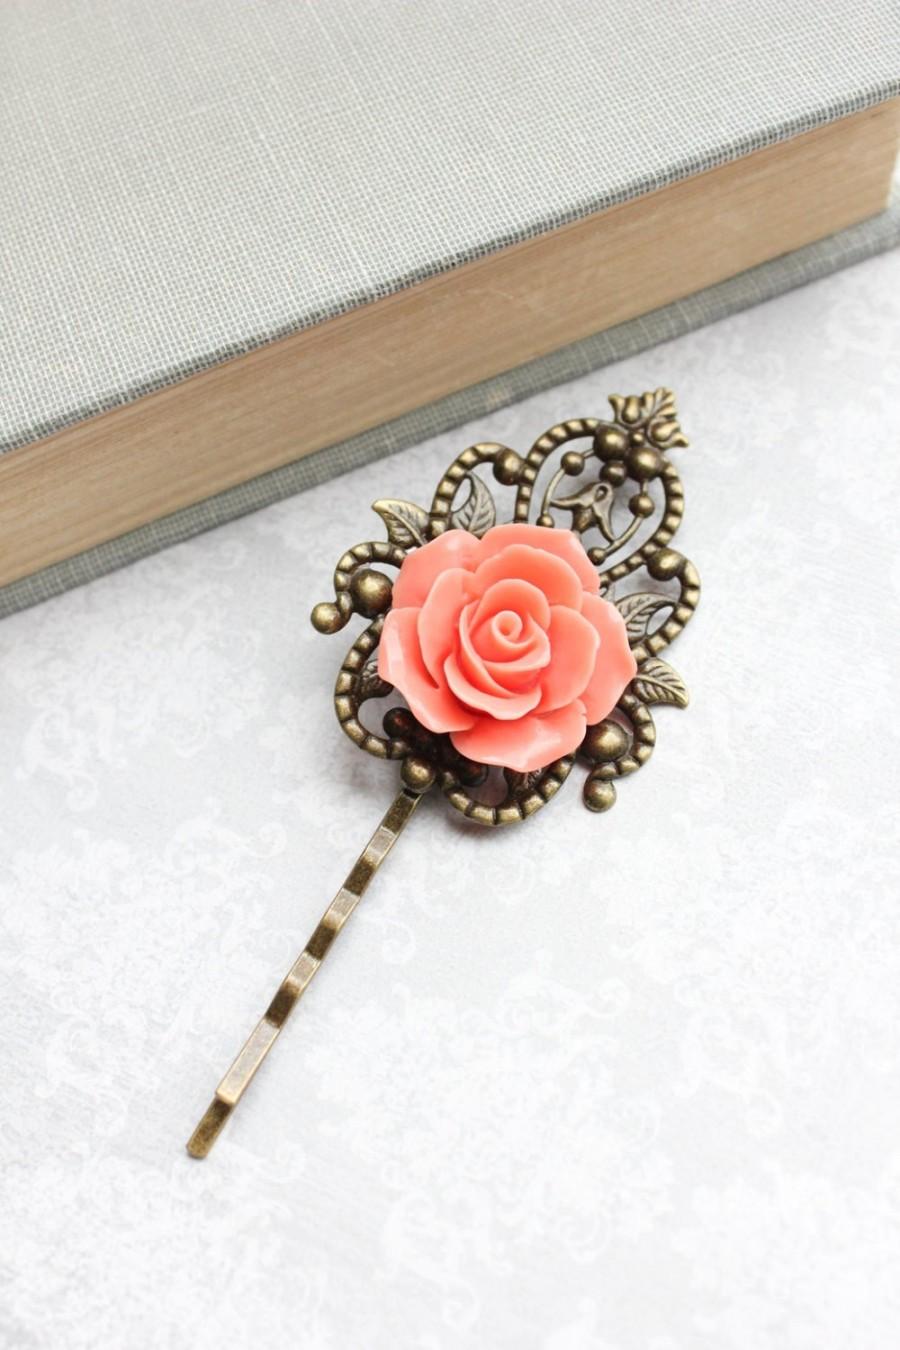 Wedding - Bridal Hair Pins Coral Rose Bobby Pins Vintage Style Bridesmaid Gift Romantic Antique Brass Filigree Colorful Spring Wedding Roses for Hair